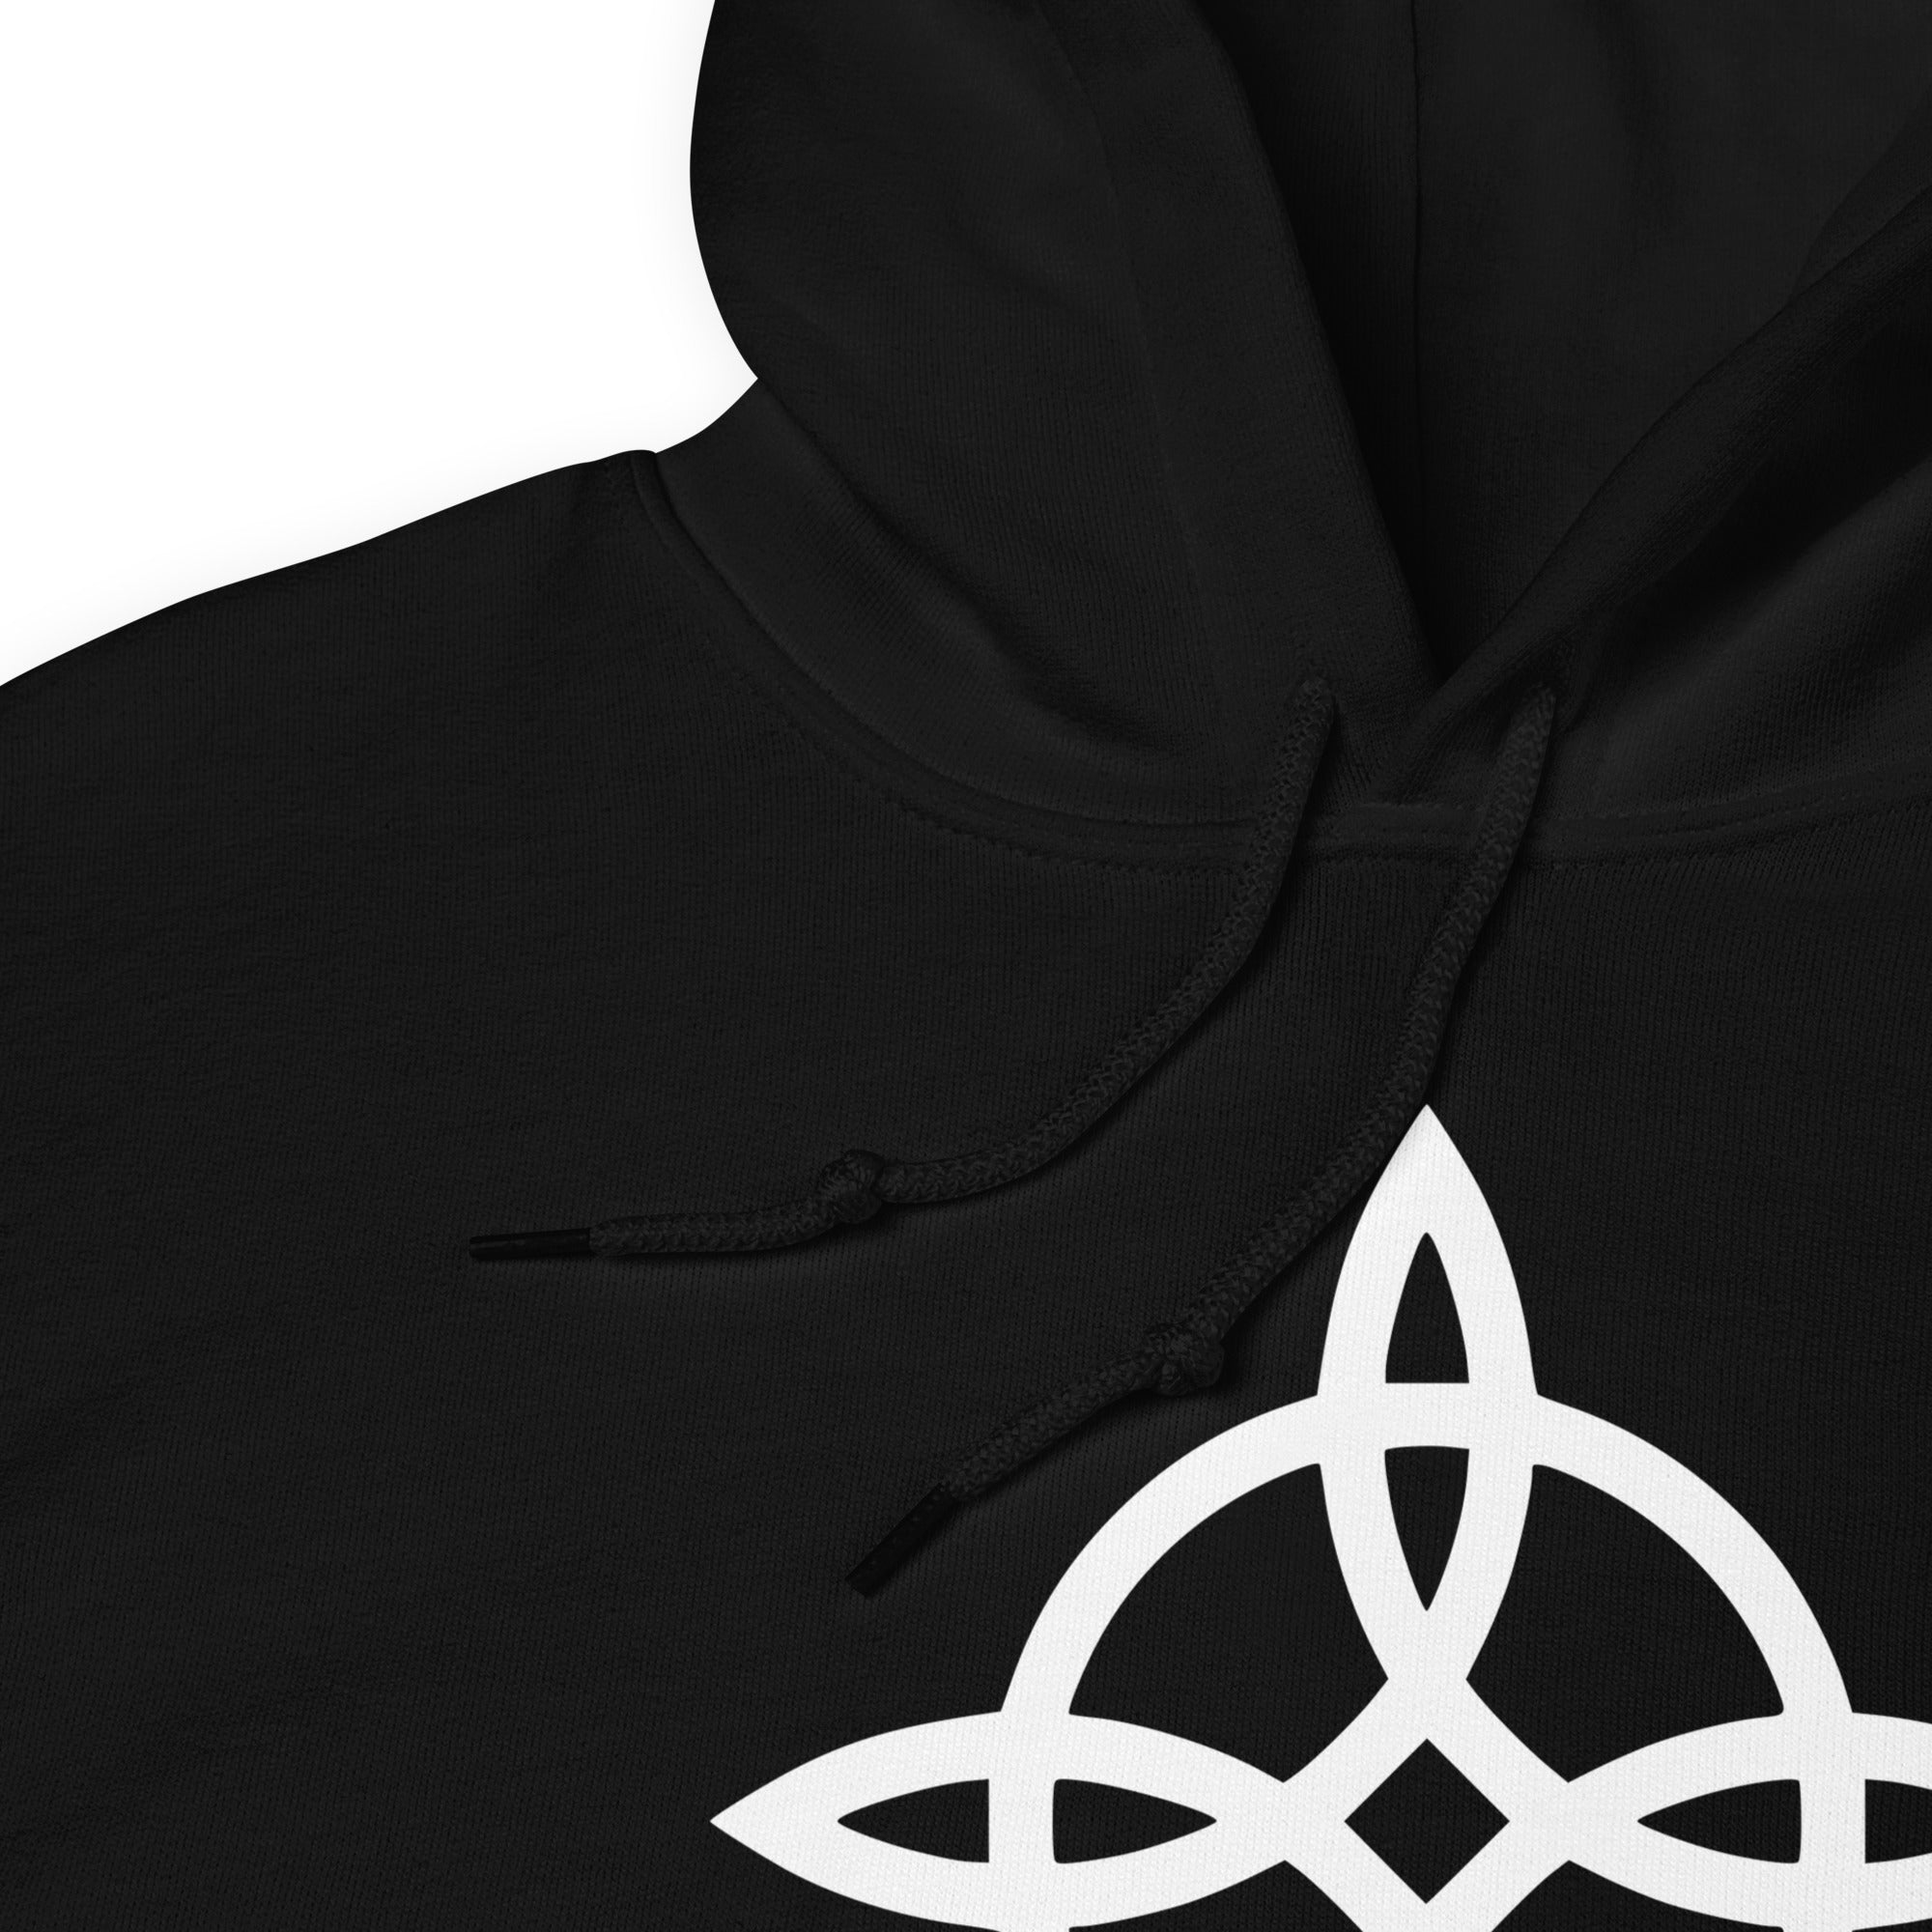 The Witches Knot Witchcraft Protection Symbol Hoodie Sweatshirt